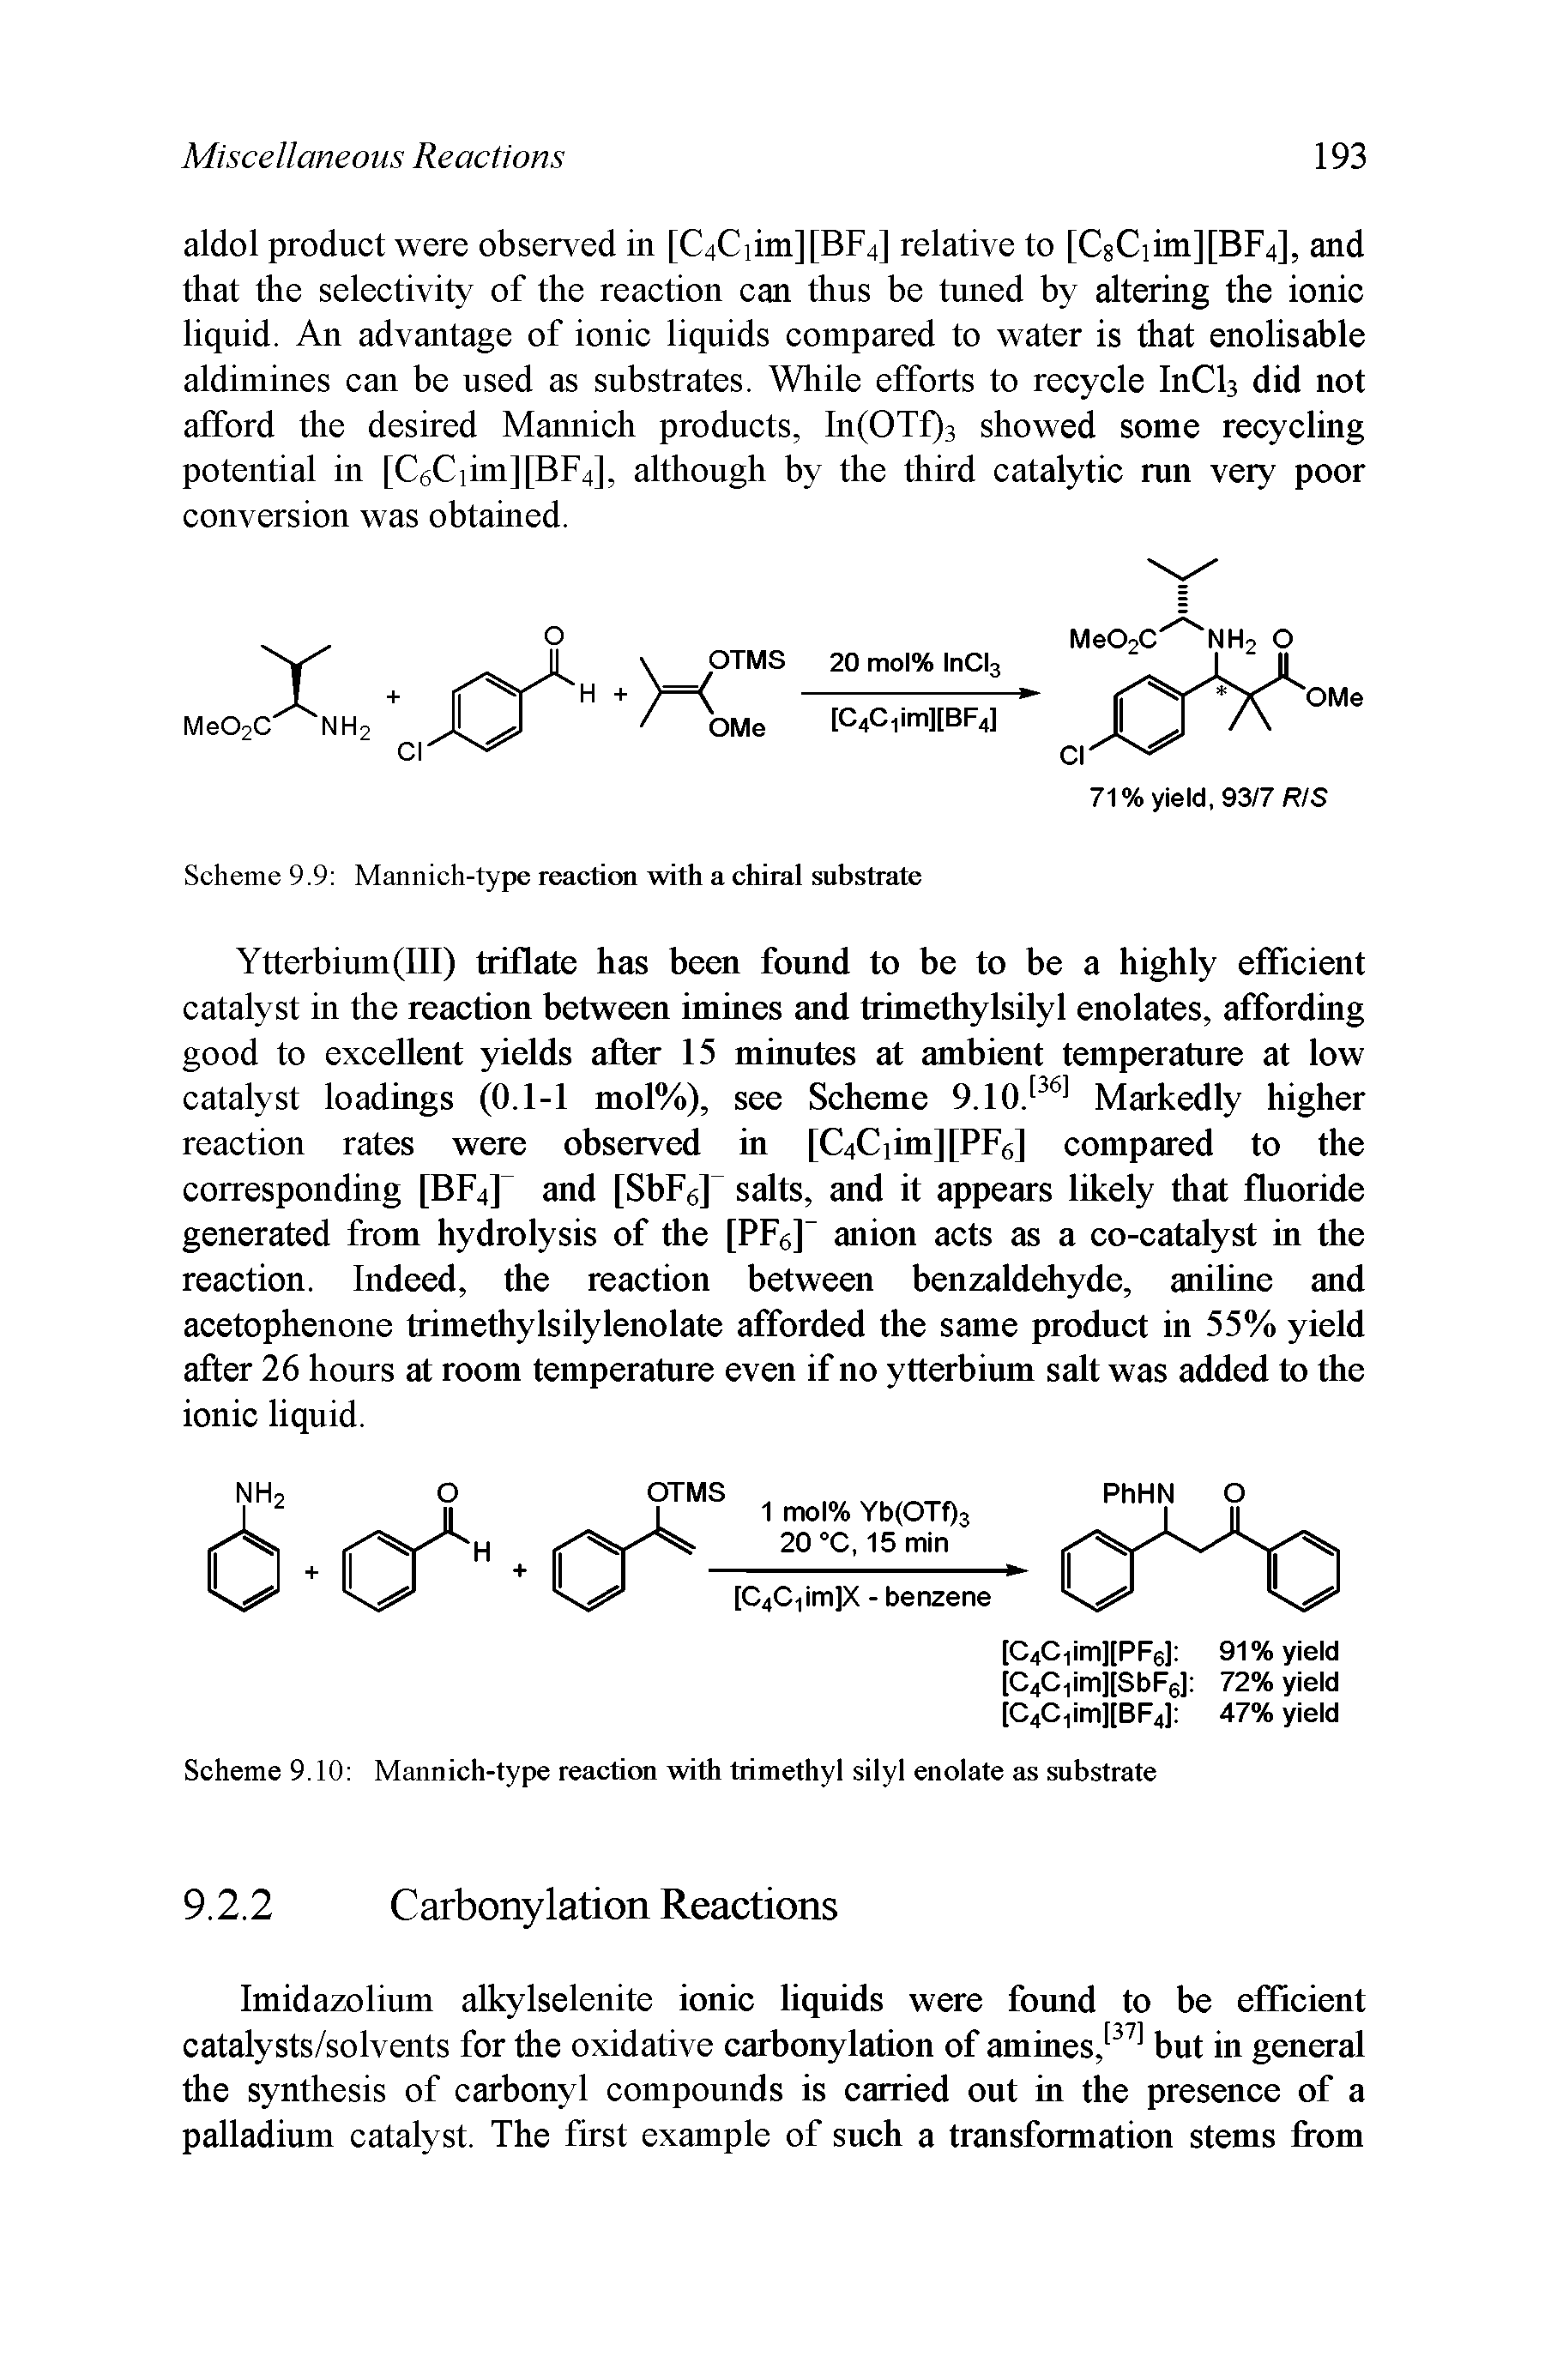 Scheme 9.10 Mannich-type reaction with trimethyl silyl enolate as substrate...